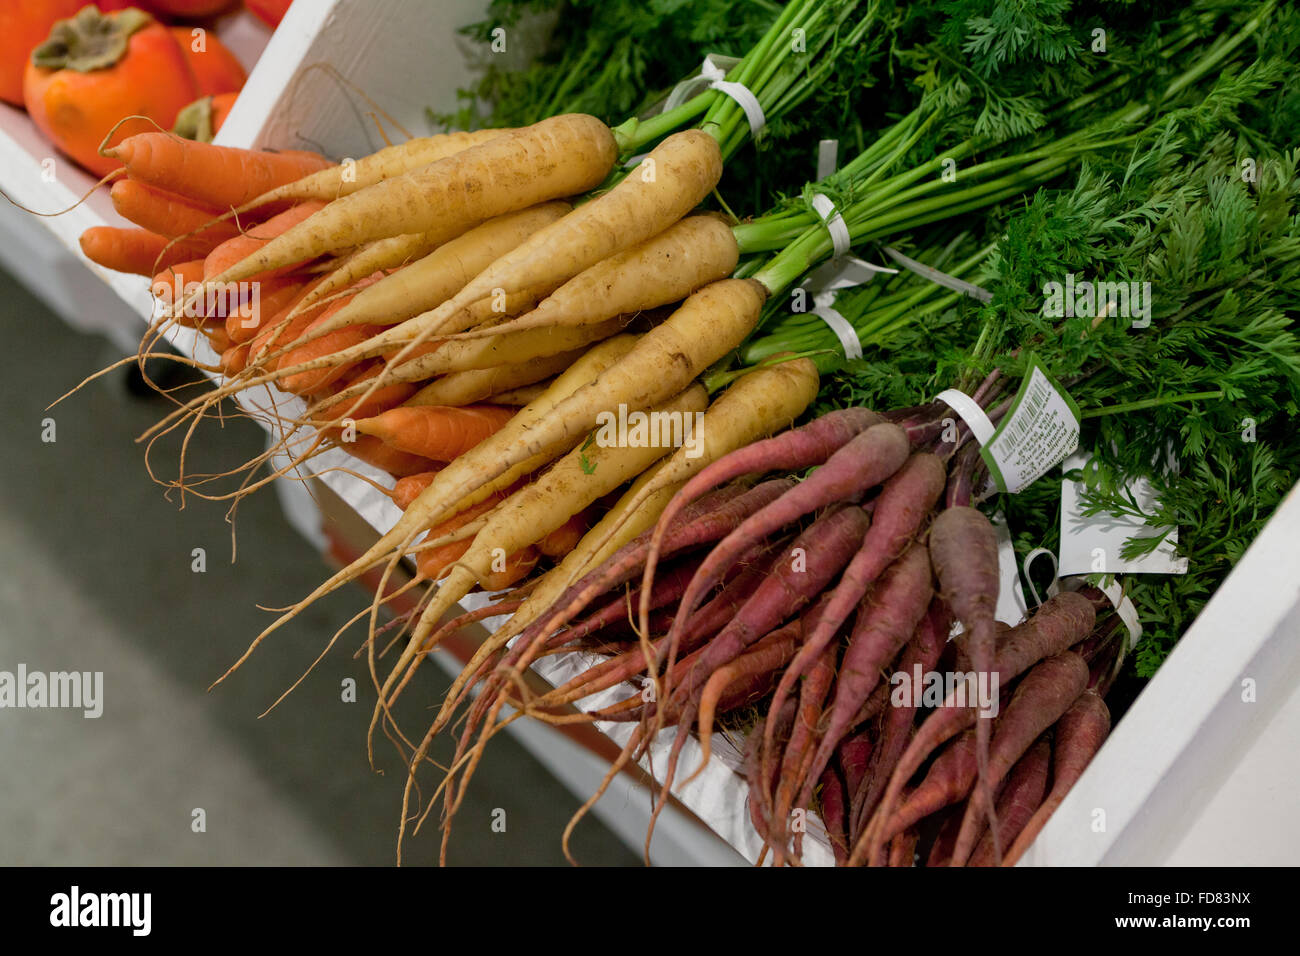 Yellow and red carrot bunches at farmers market - USA Stock Photo